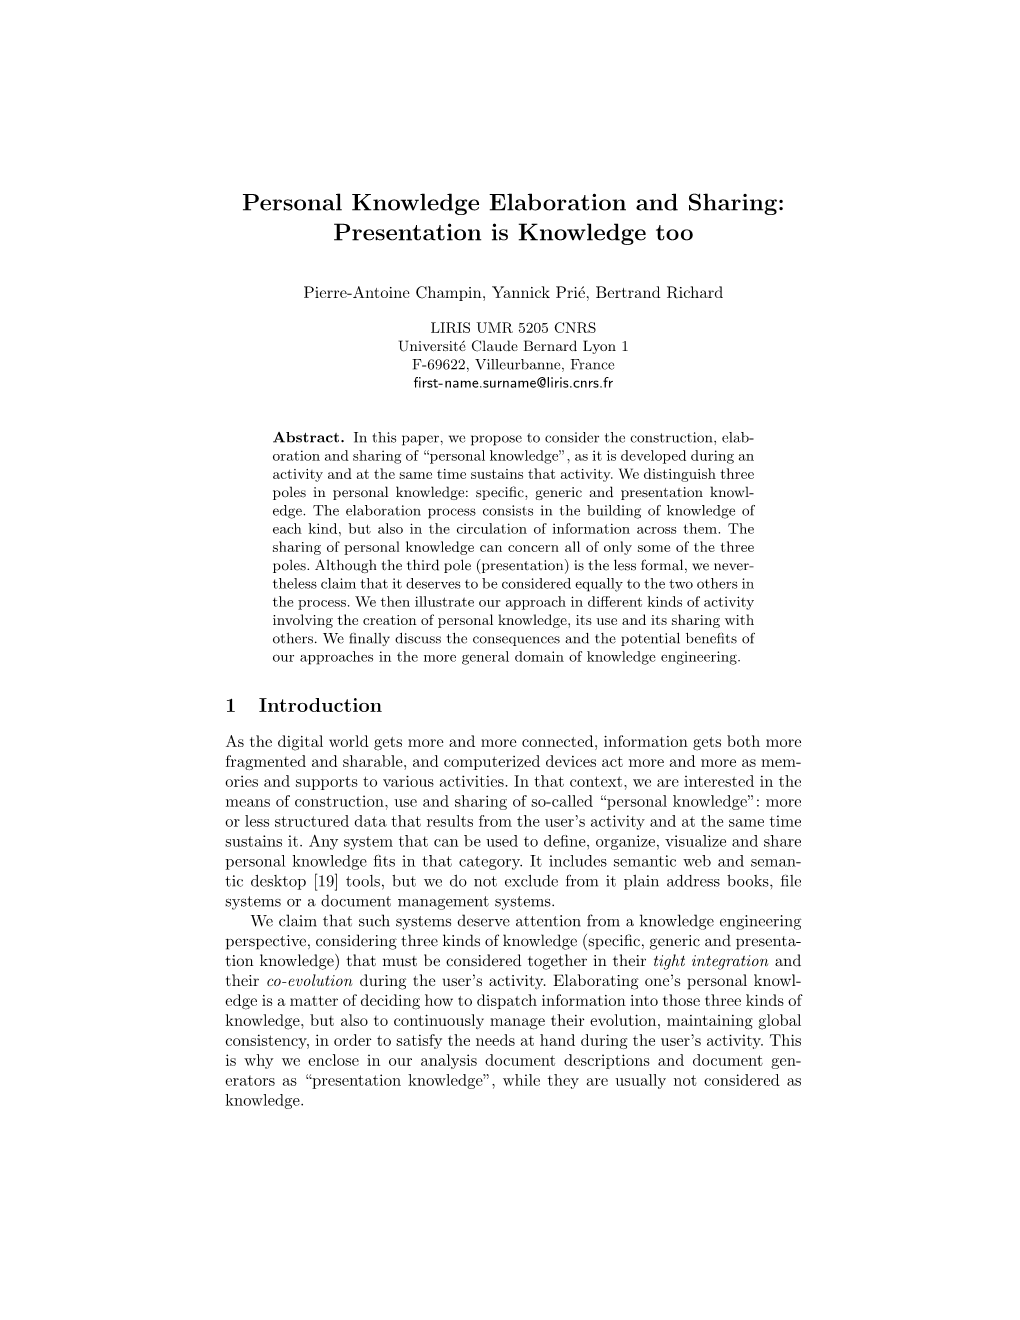 Personal Knowledge Elaboration and Sharing: Presentation Is Knowledge Too